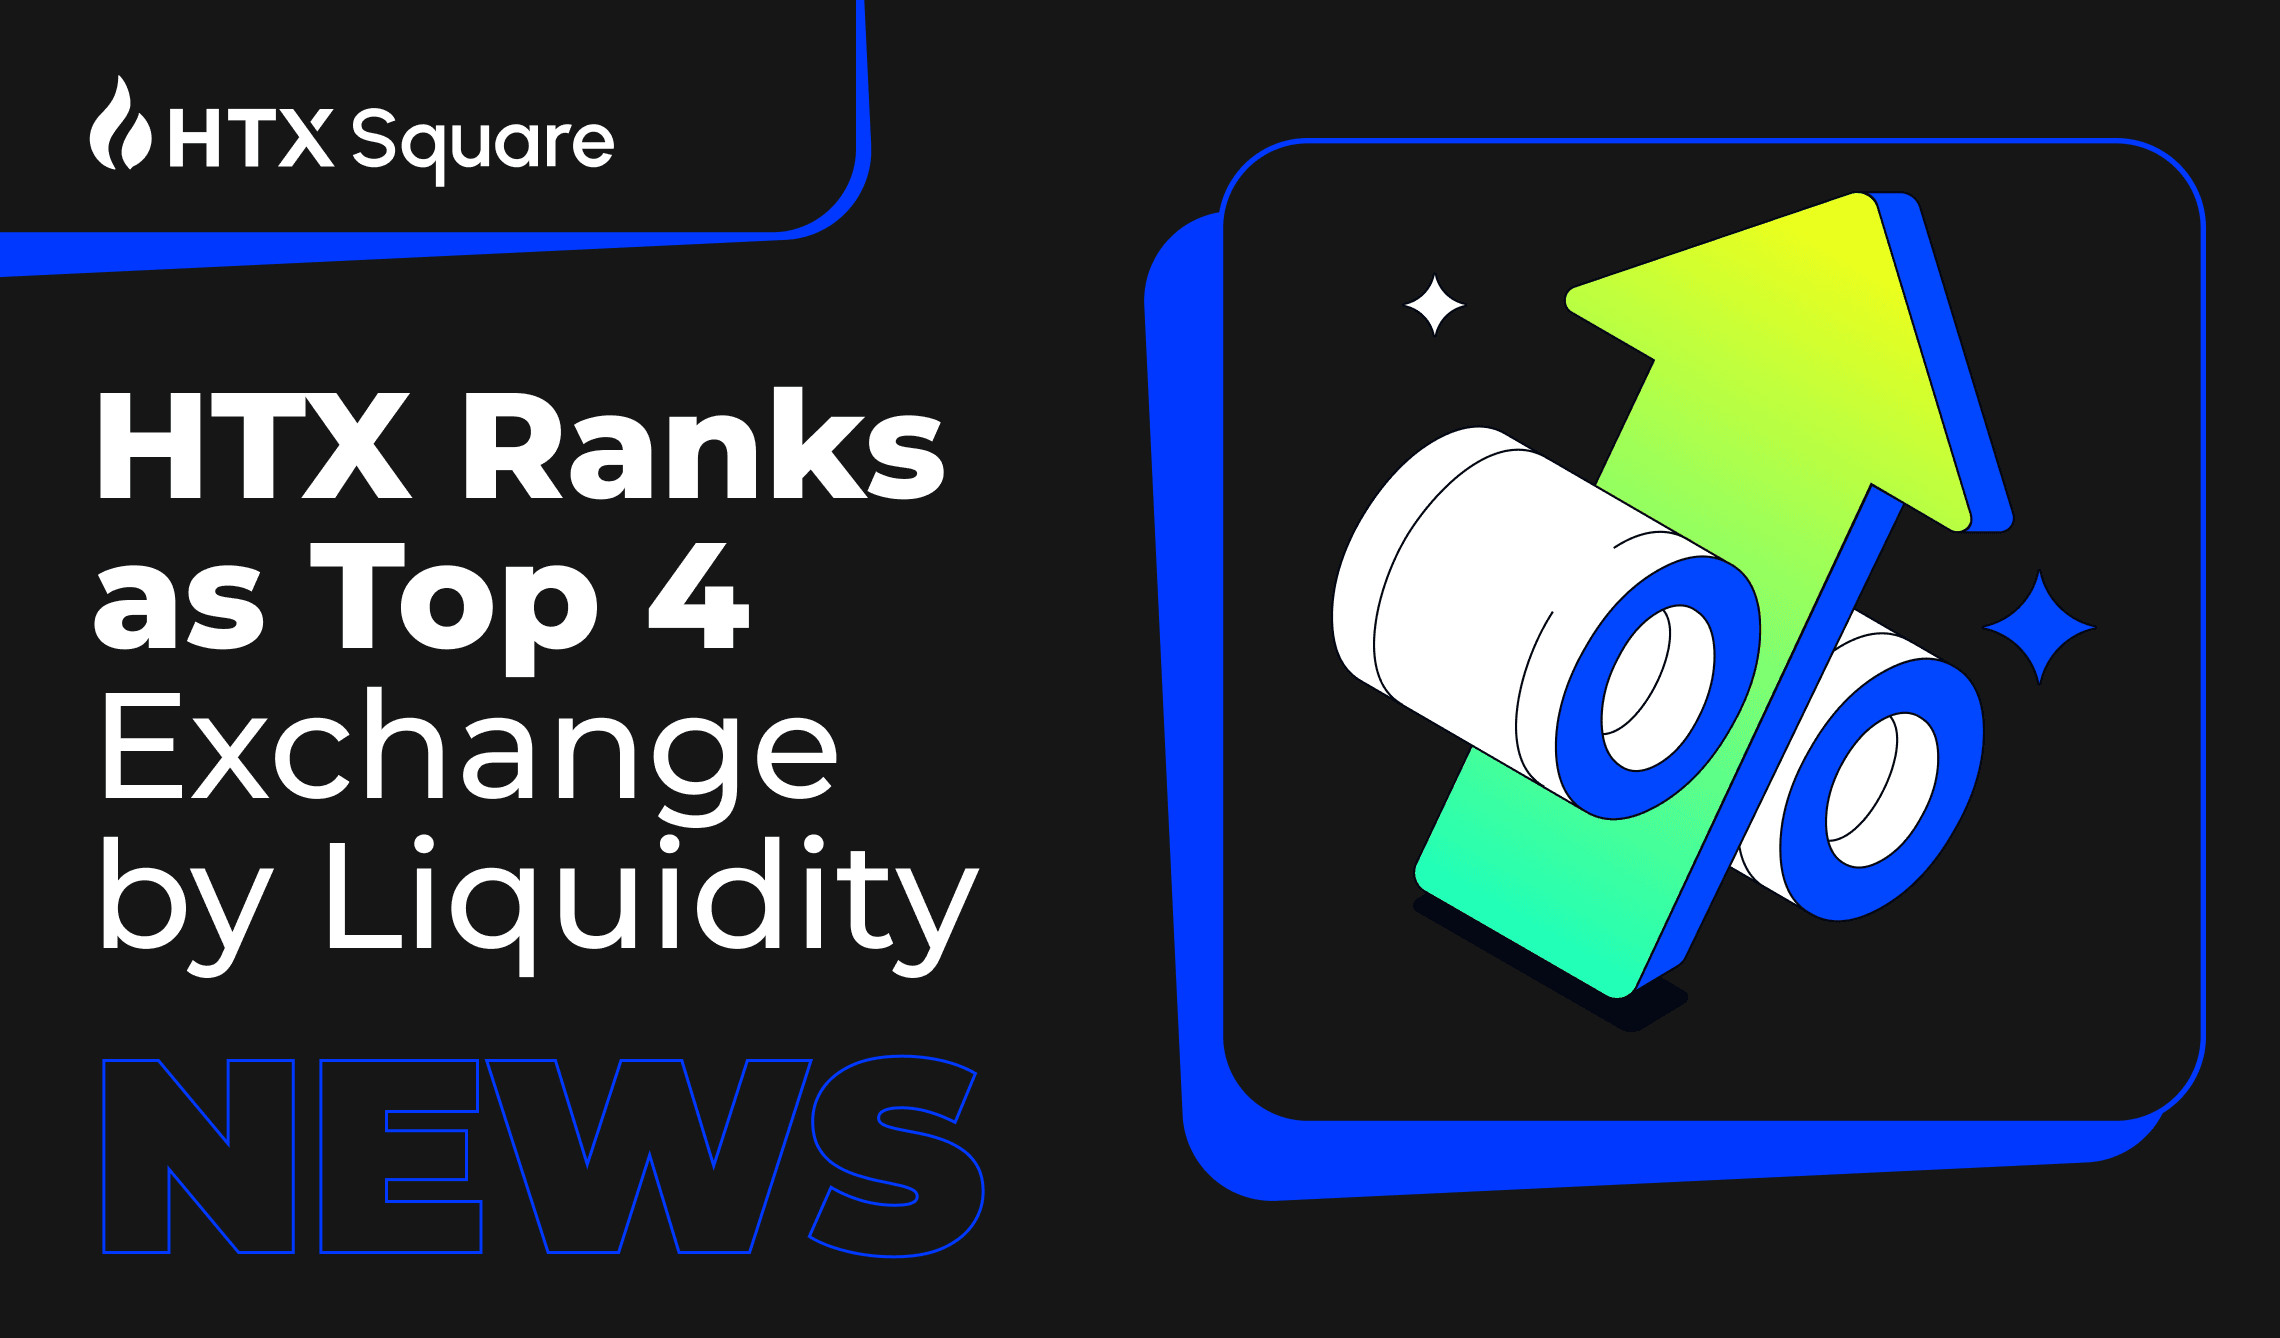 HTX Ranks as Top 4 Exchange by Liquidity, Aspiring to Be Synonymous with Quality Assets